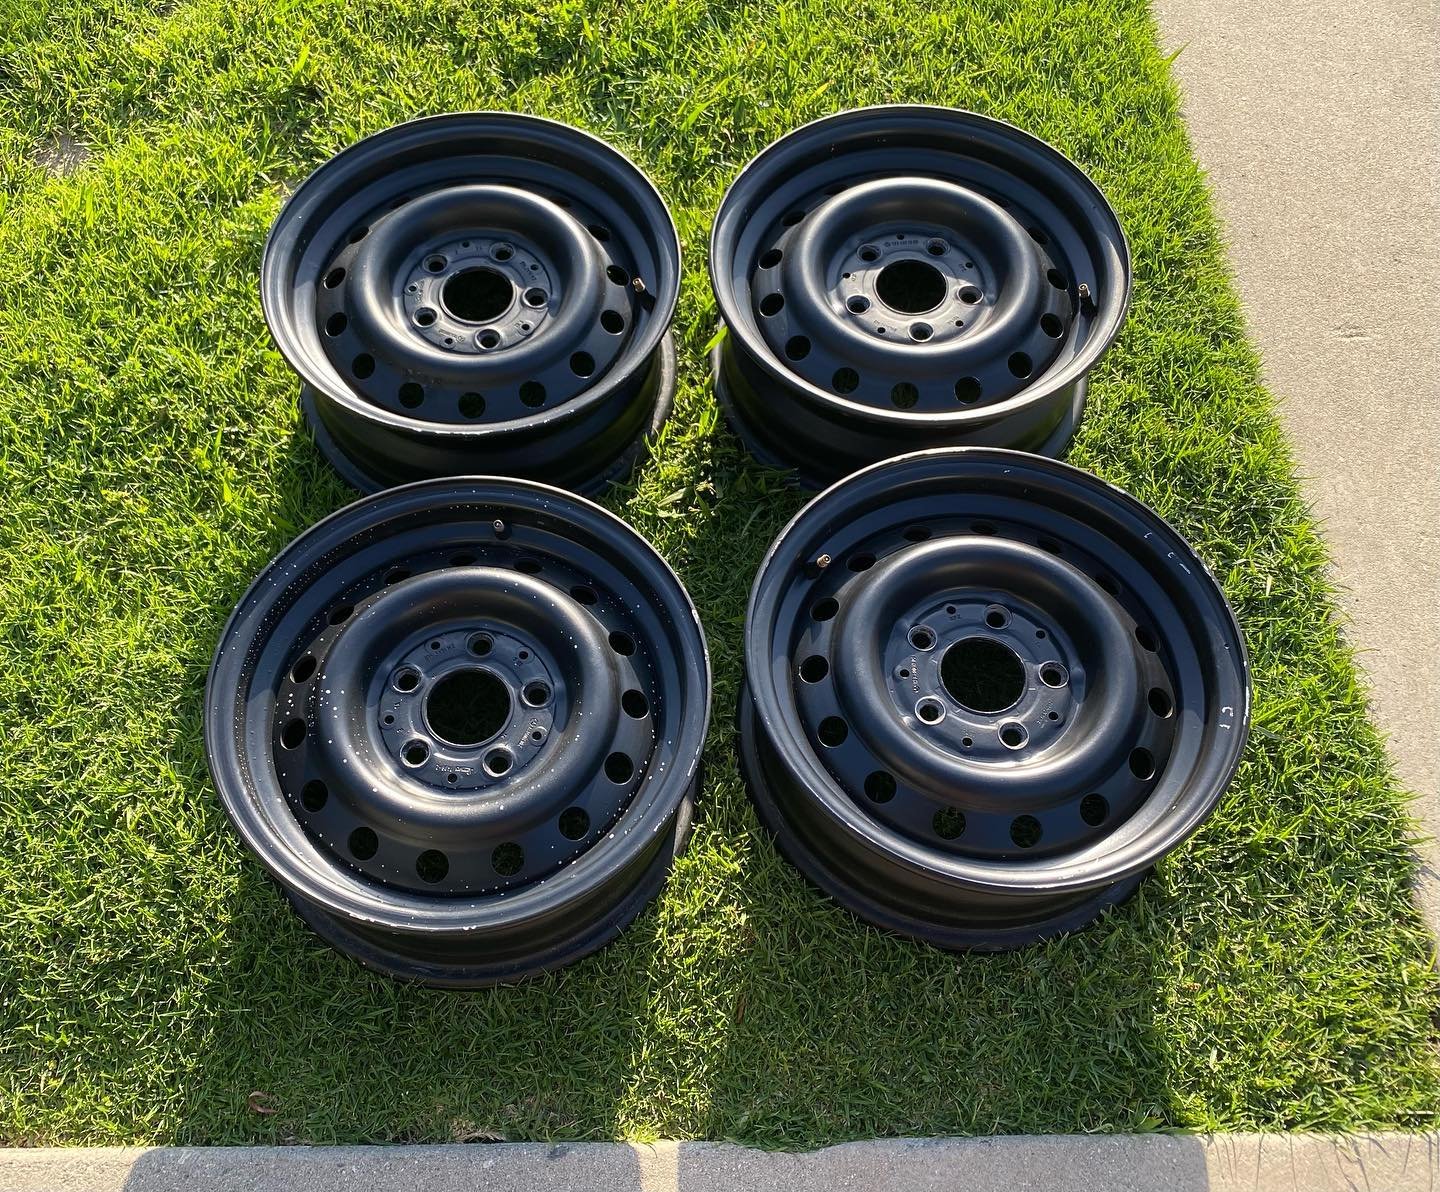 FOR SALE: steelies, but aluminum! Rare, super lightweight, optional Mercedes W123 wheels. Coming in at under 10lbs each, they&rsquo;re less than half the weight of factory steelies. 14x5.5&rdquo; et30 5x112mm. Perfect upgrade for a W113, W123, early 